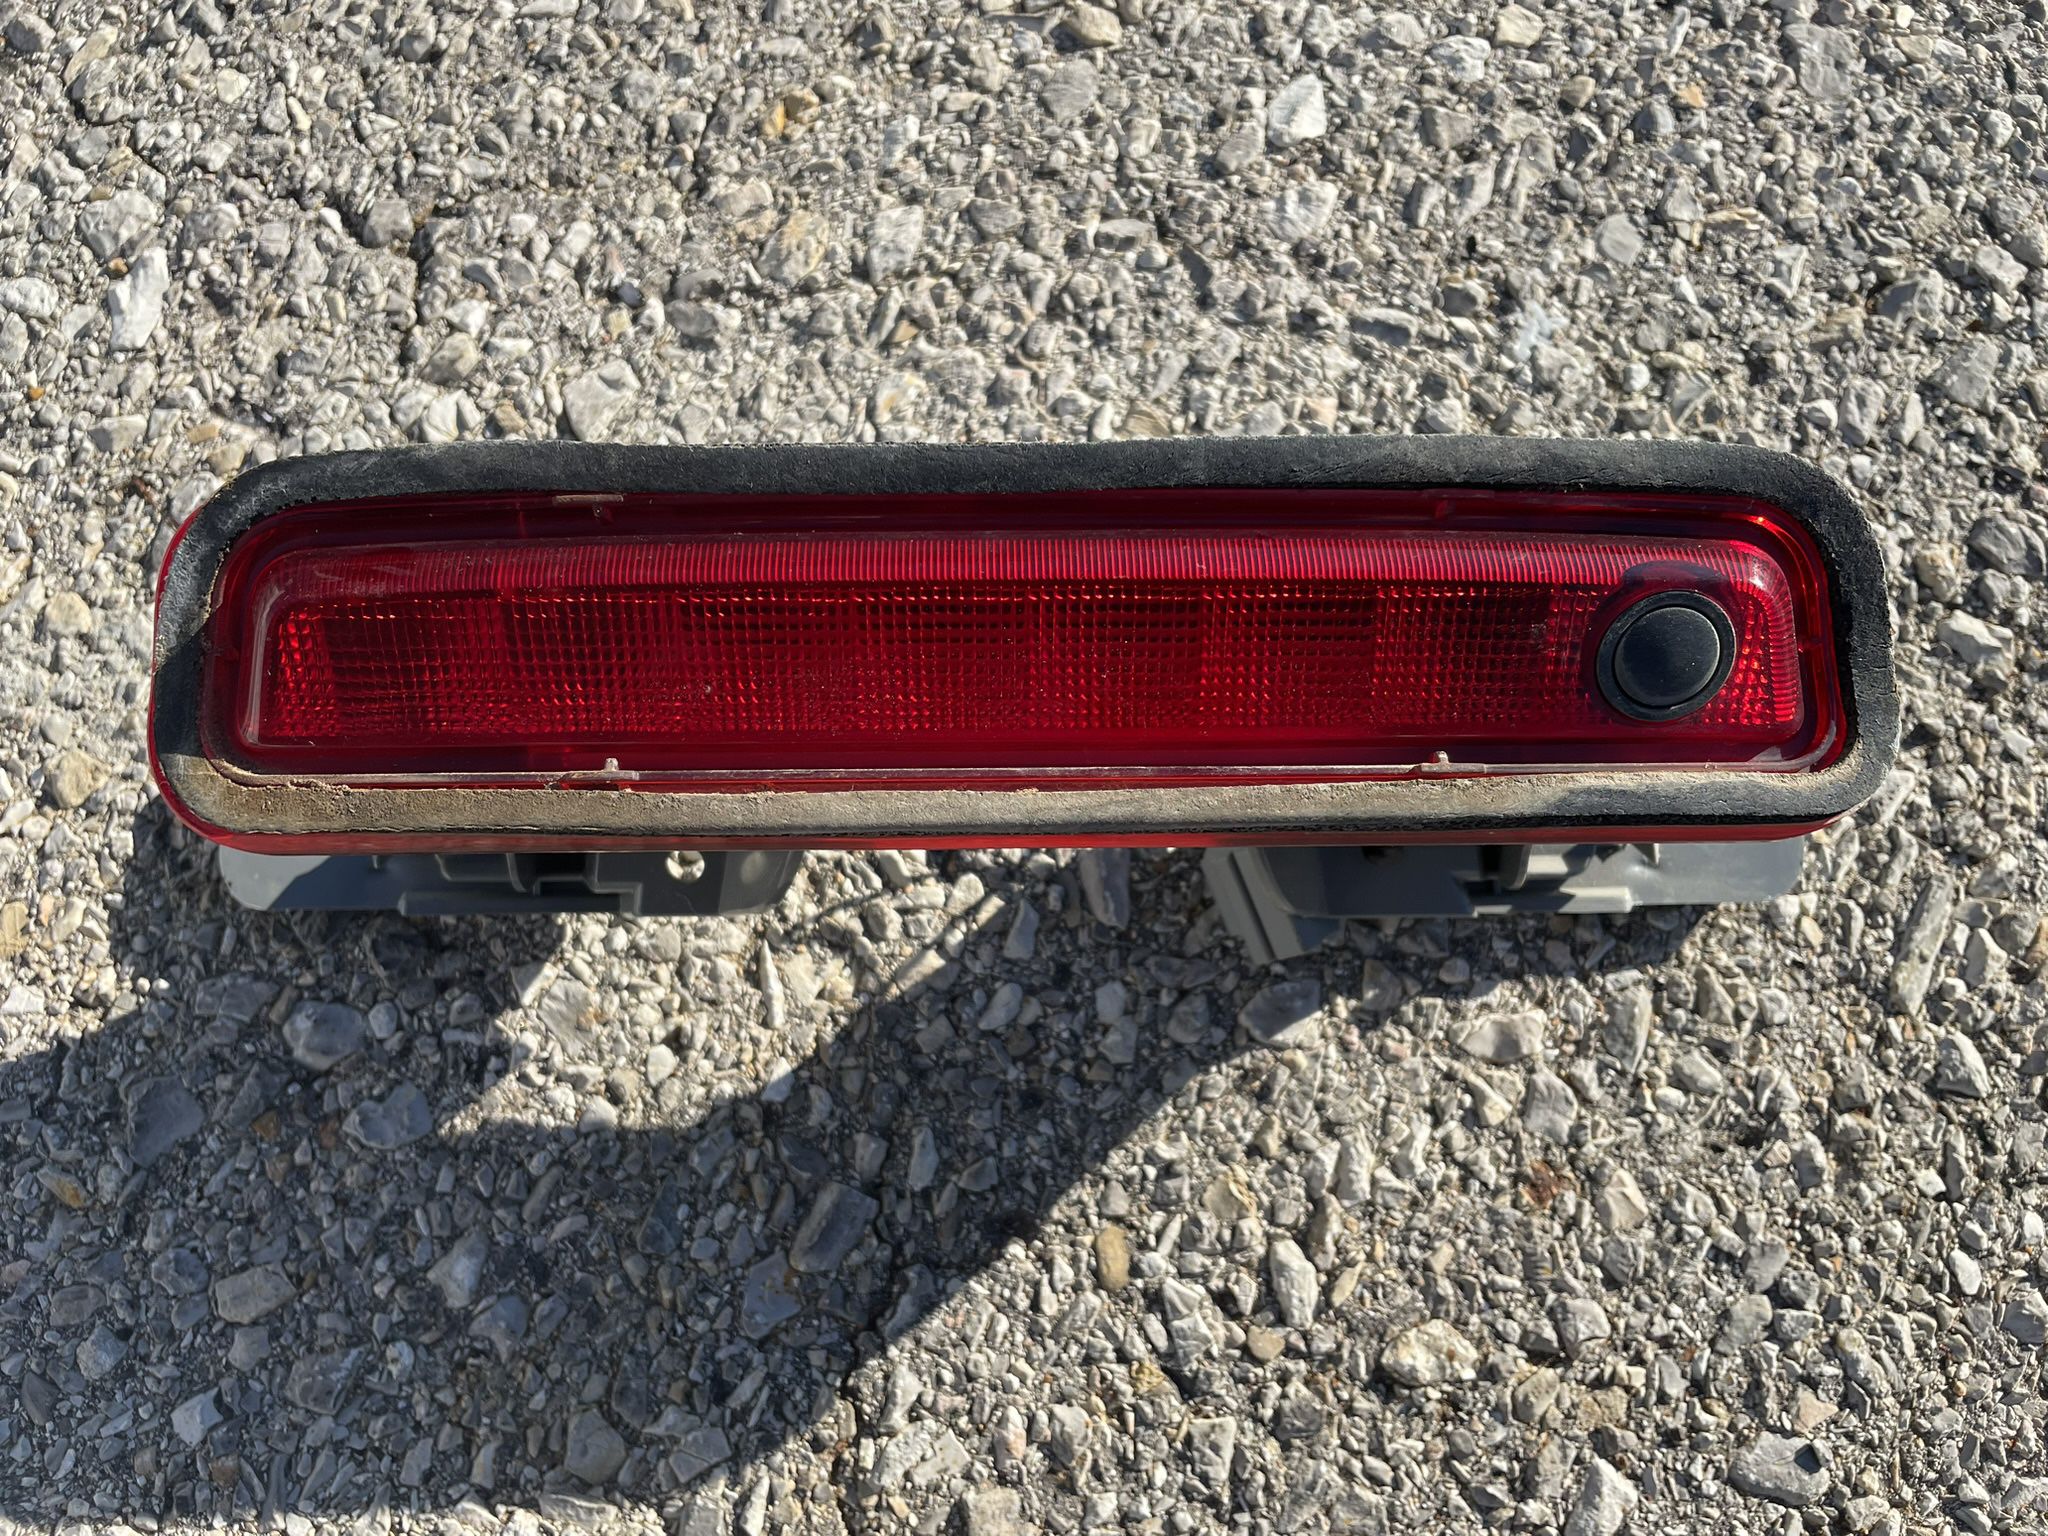 11 12 13 14 DODGE CHARGER R/T REAR TRUNK BRAKE LIGHT NO. 3 ASSEMBLY